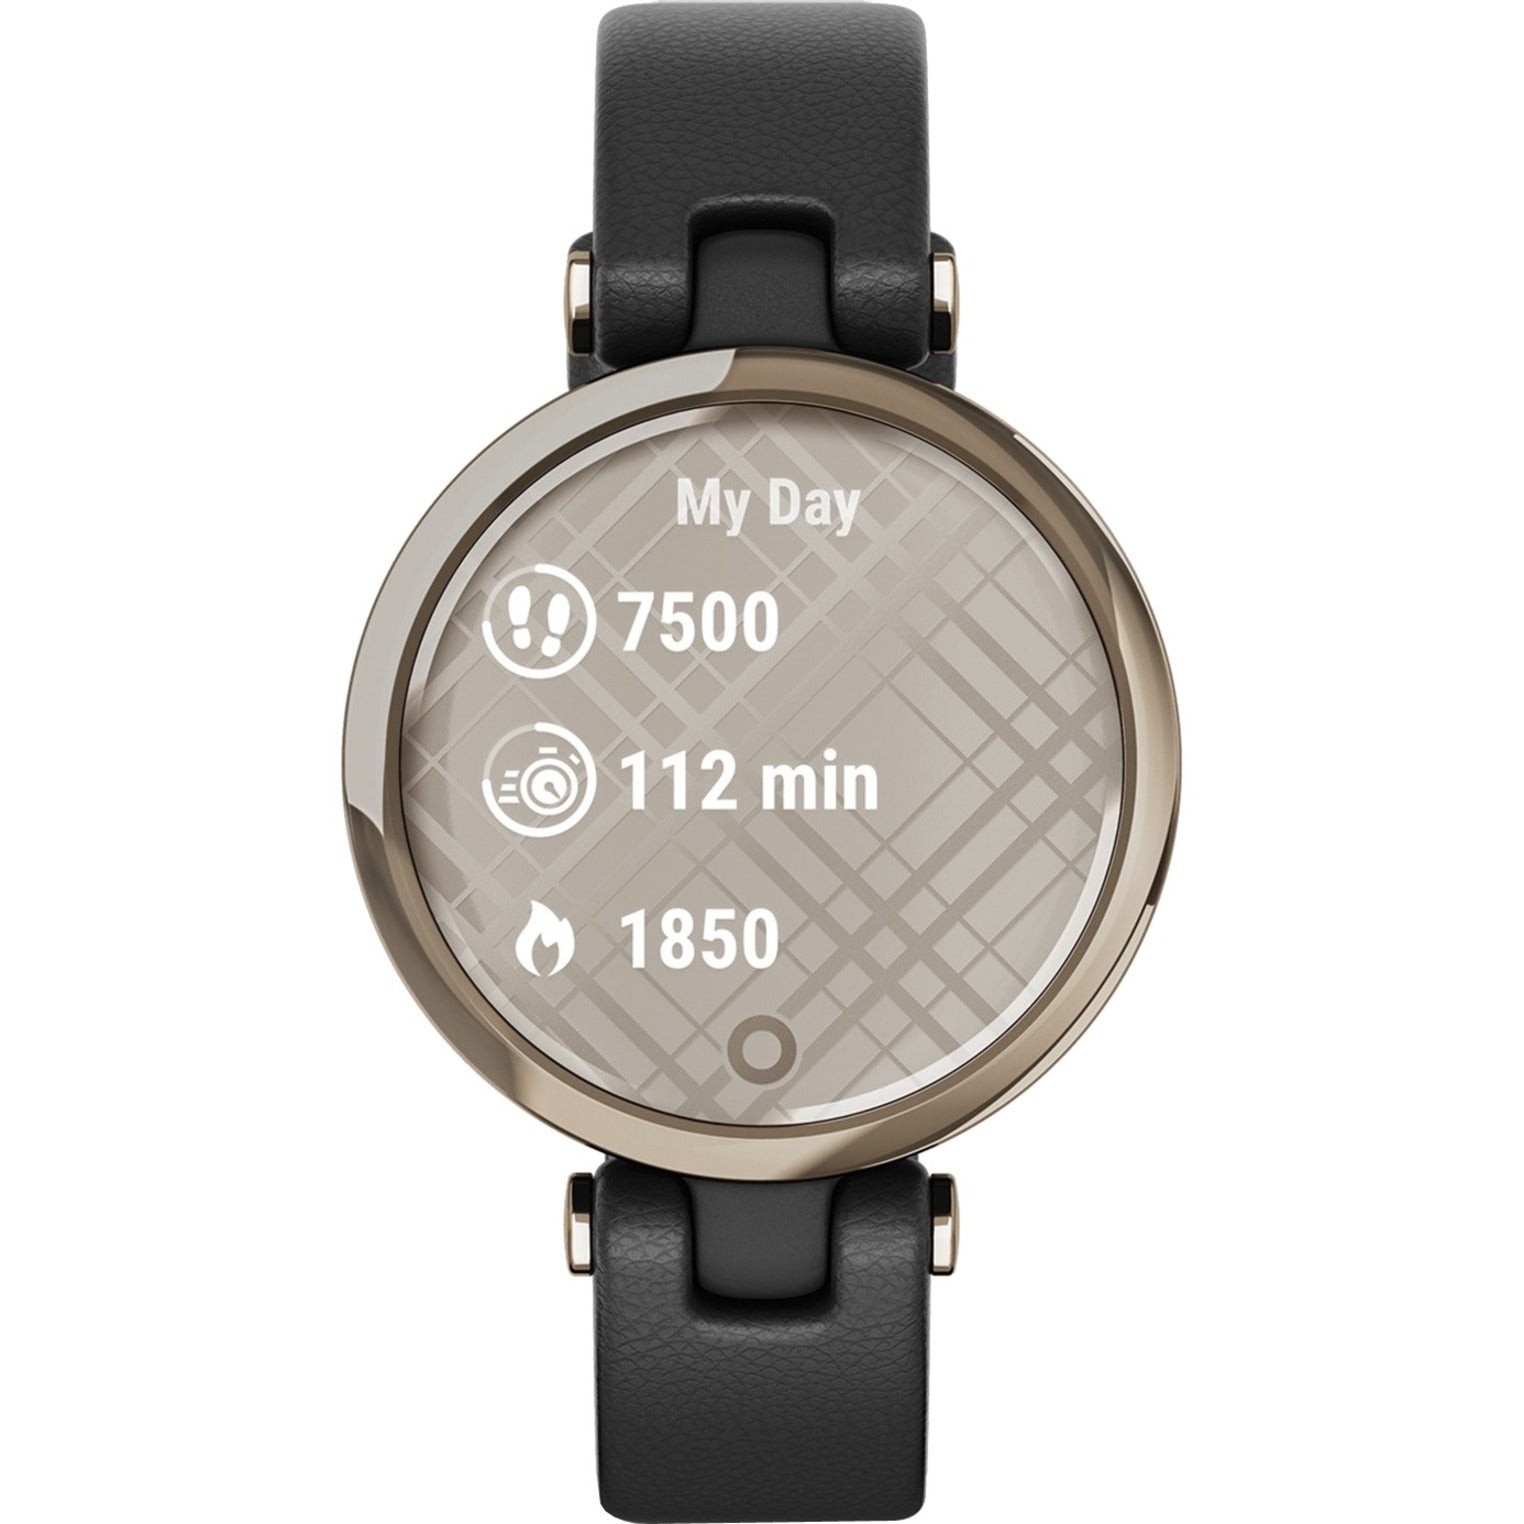 Garmin Lily Smart Watch - Water Resistant, Touchscreen, Women's Fitness Tracker [Discontinued]